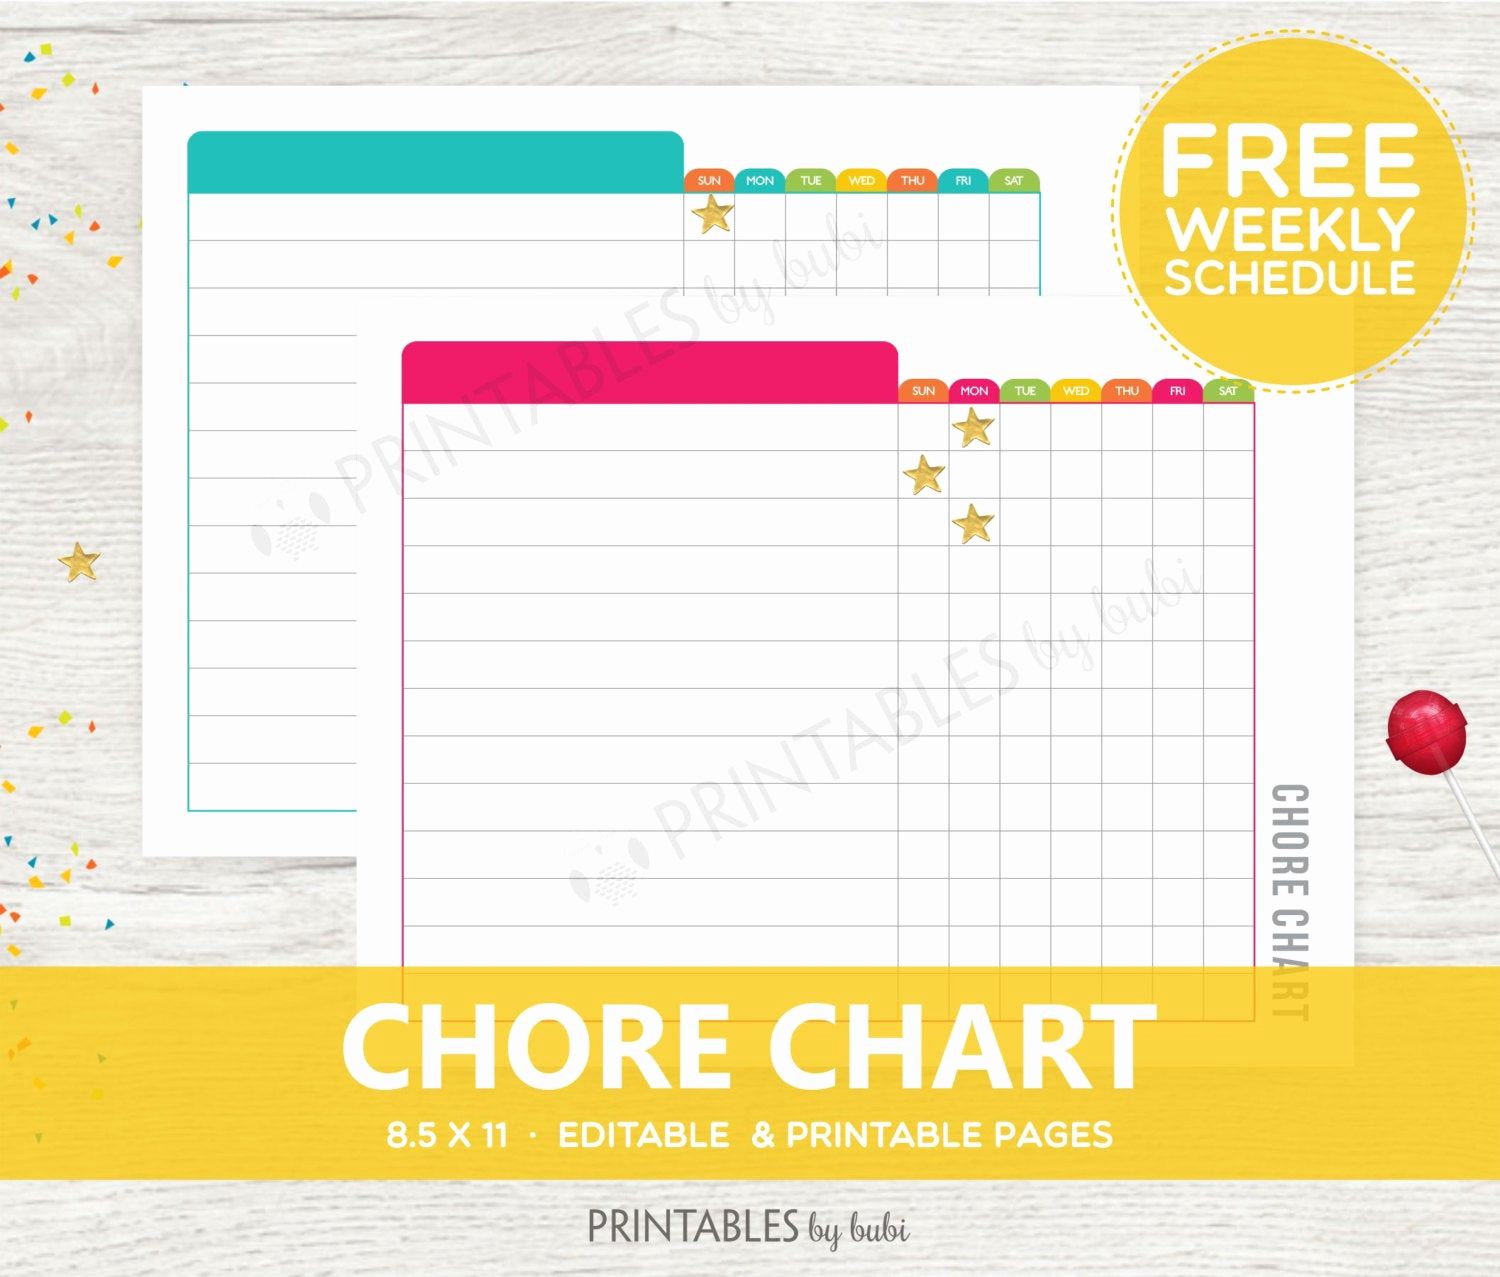 Free Editable Printable Chore Charts Lovely Printable Kids Chore Chart and Weekly Schedule 8 5 by